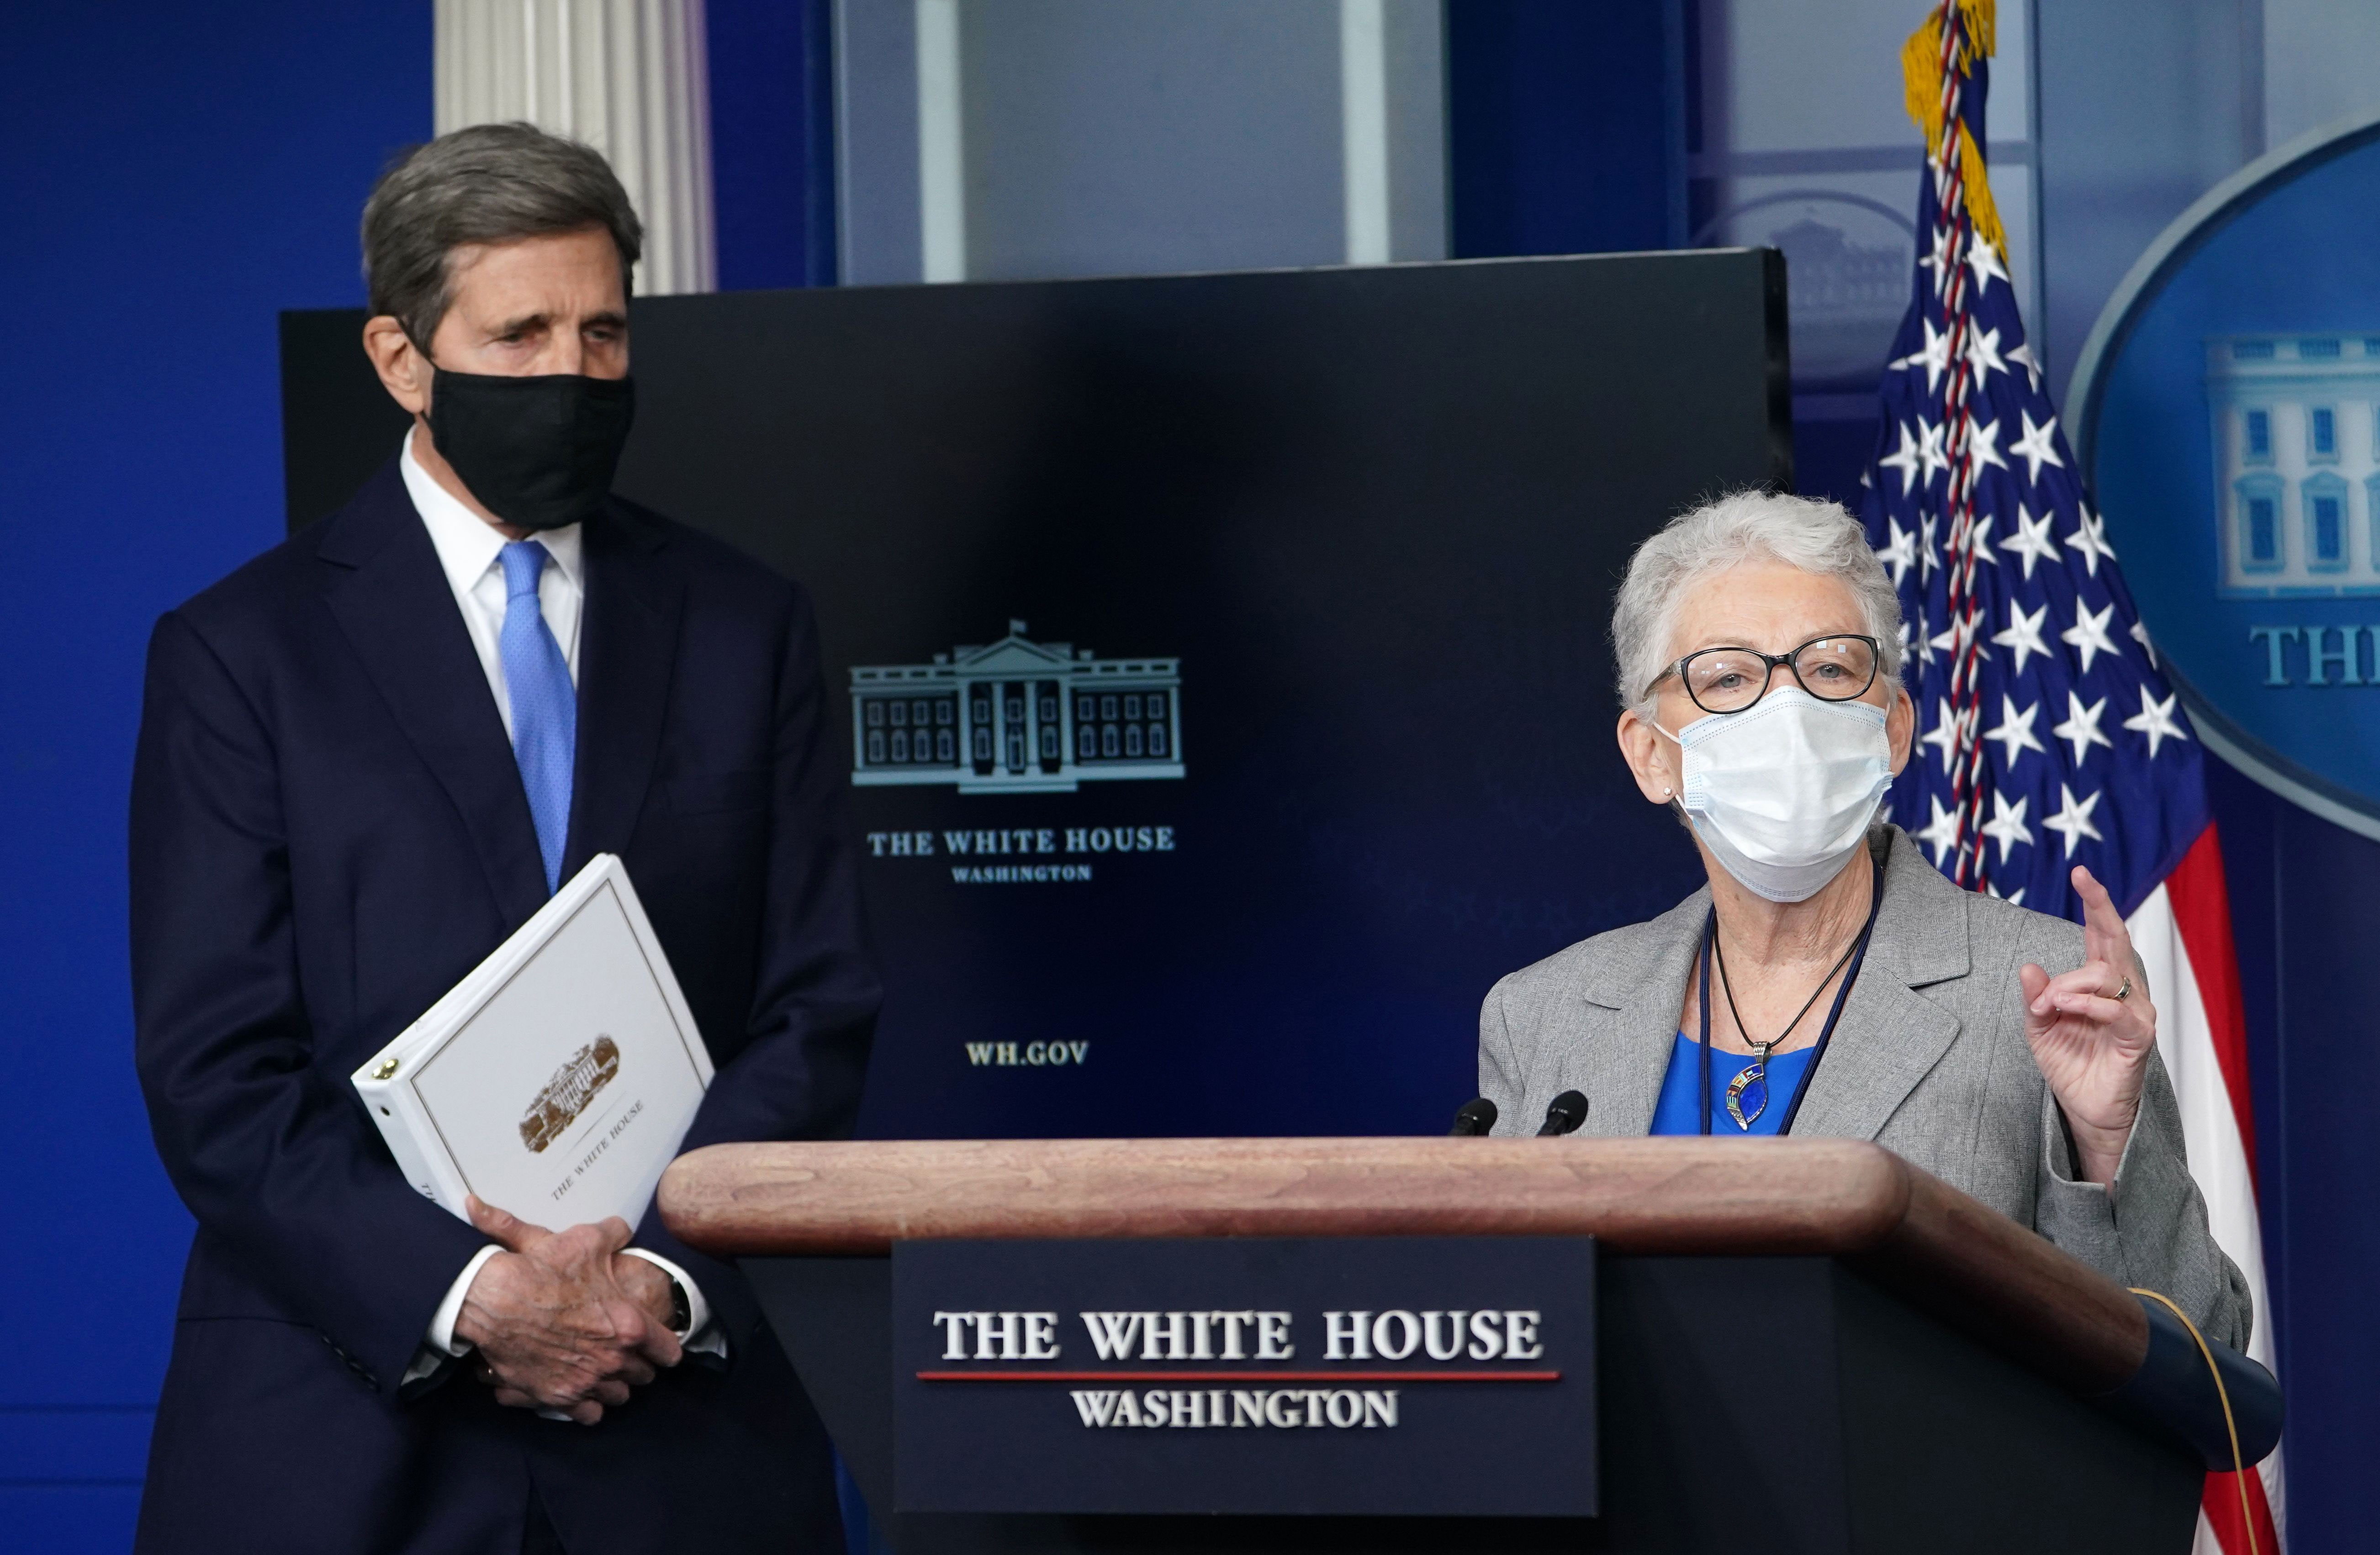 National Climate Adviser Gina McCarthy speaks at a briefing at the White House on January 27. On the left is Special Presidential Envoy for Climate John Kerry.